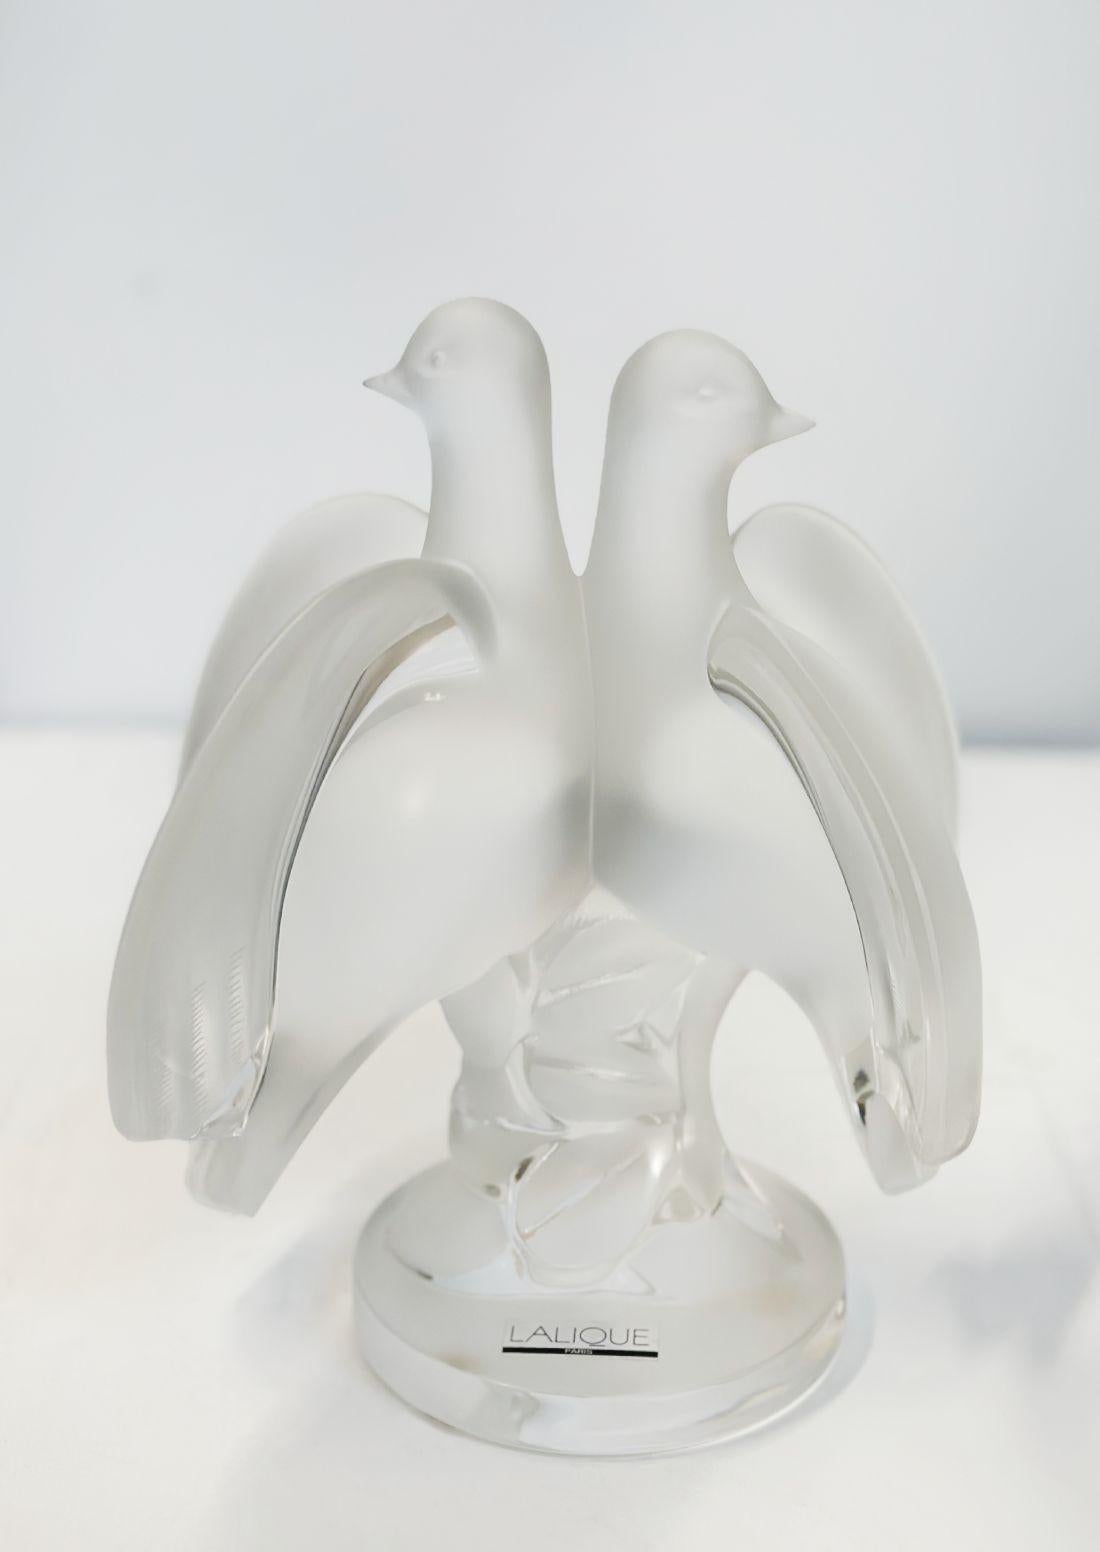 Graceful frosted glass figurine molded as two doves perched on a stylized leaf covered stem with their heads turned in the opposite direction, incorporating a circular plinth depicting a trunk with leaves that is supported by a clear round base with